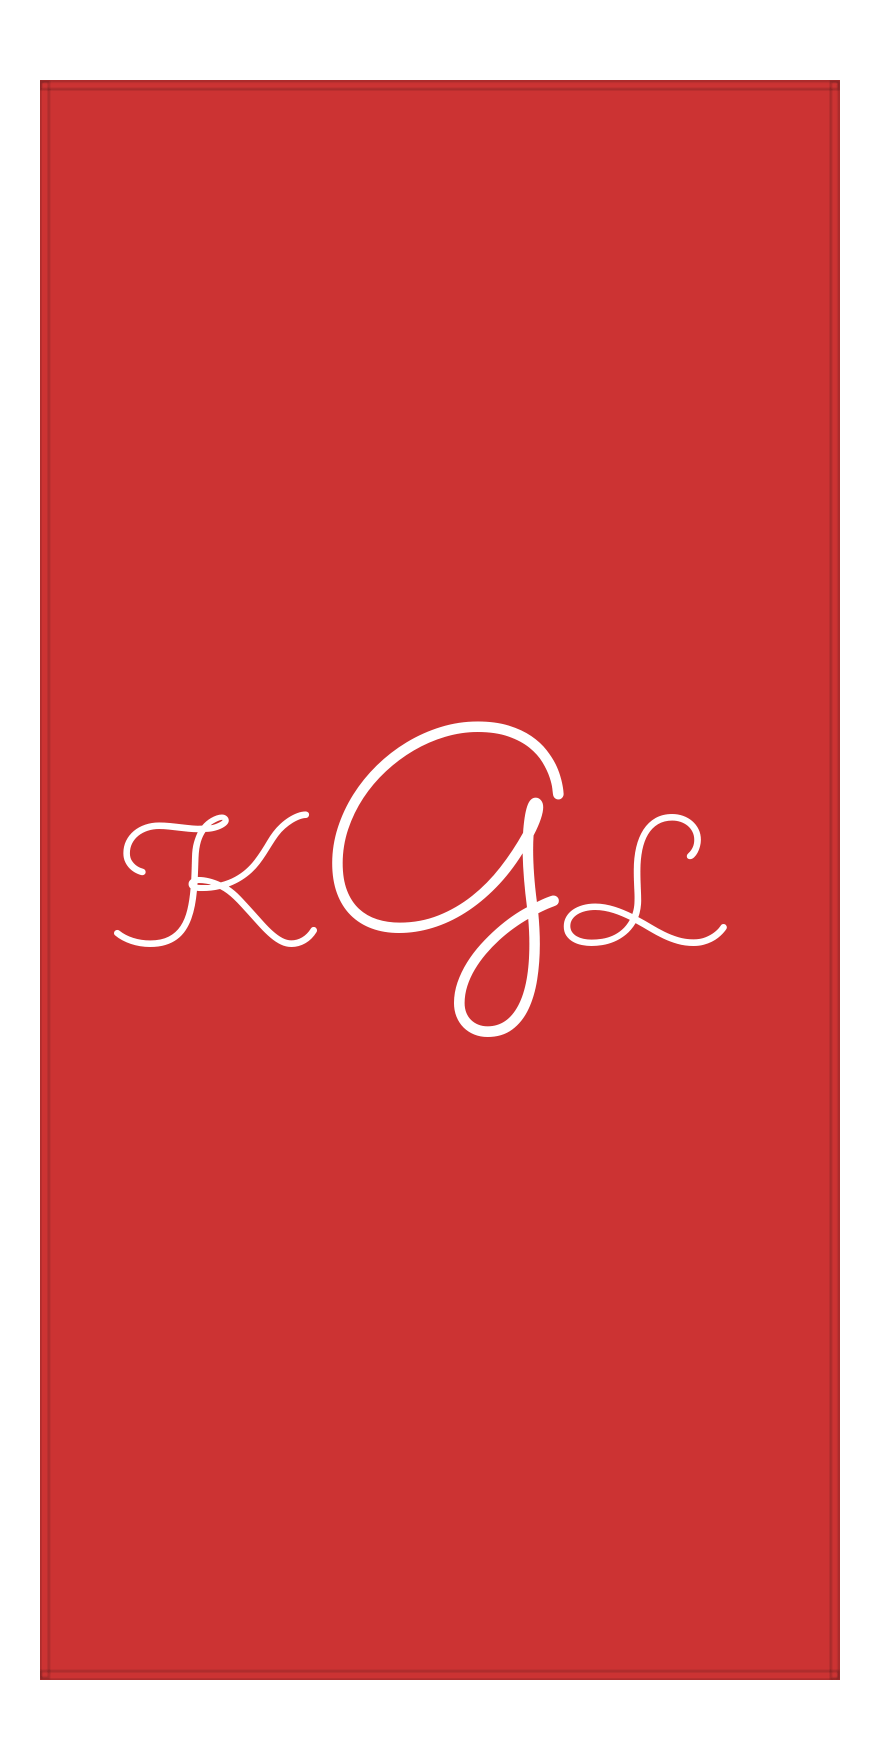 Personalized Solid Color Beach Towel - Vertical - Red Background - Monogram - Front View